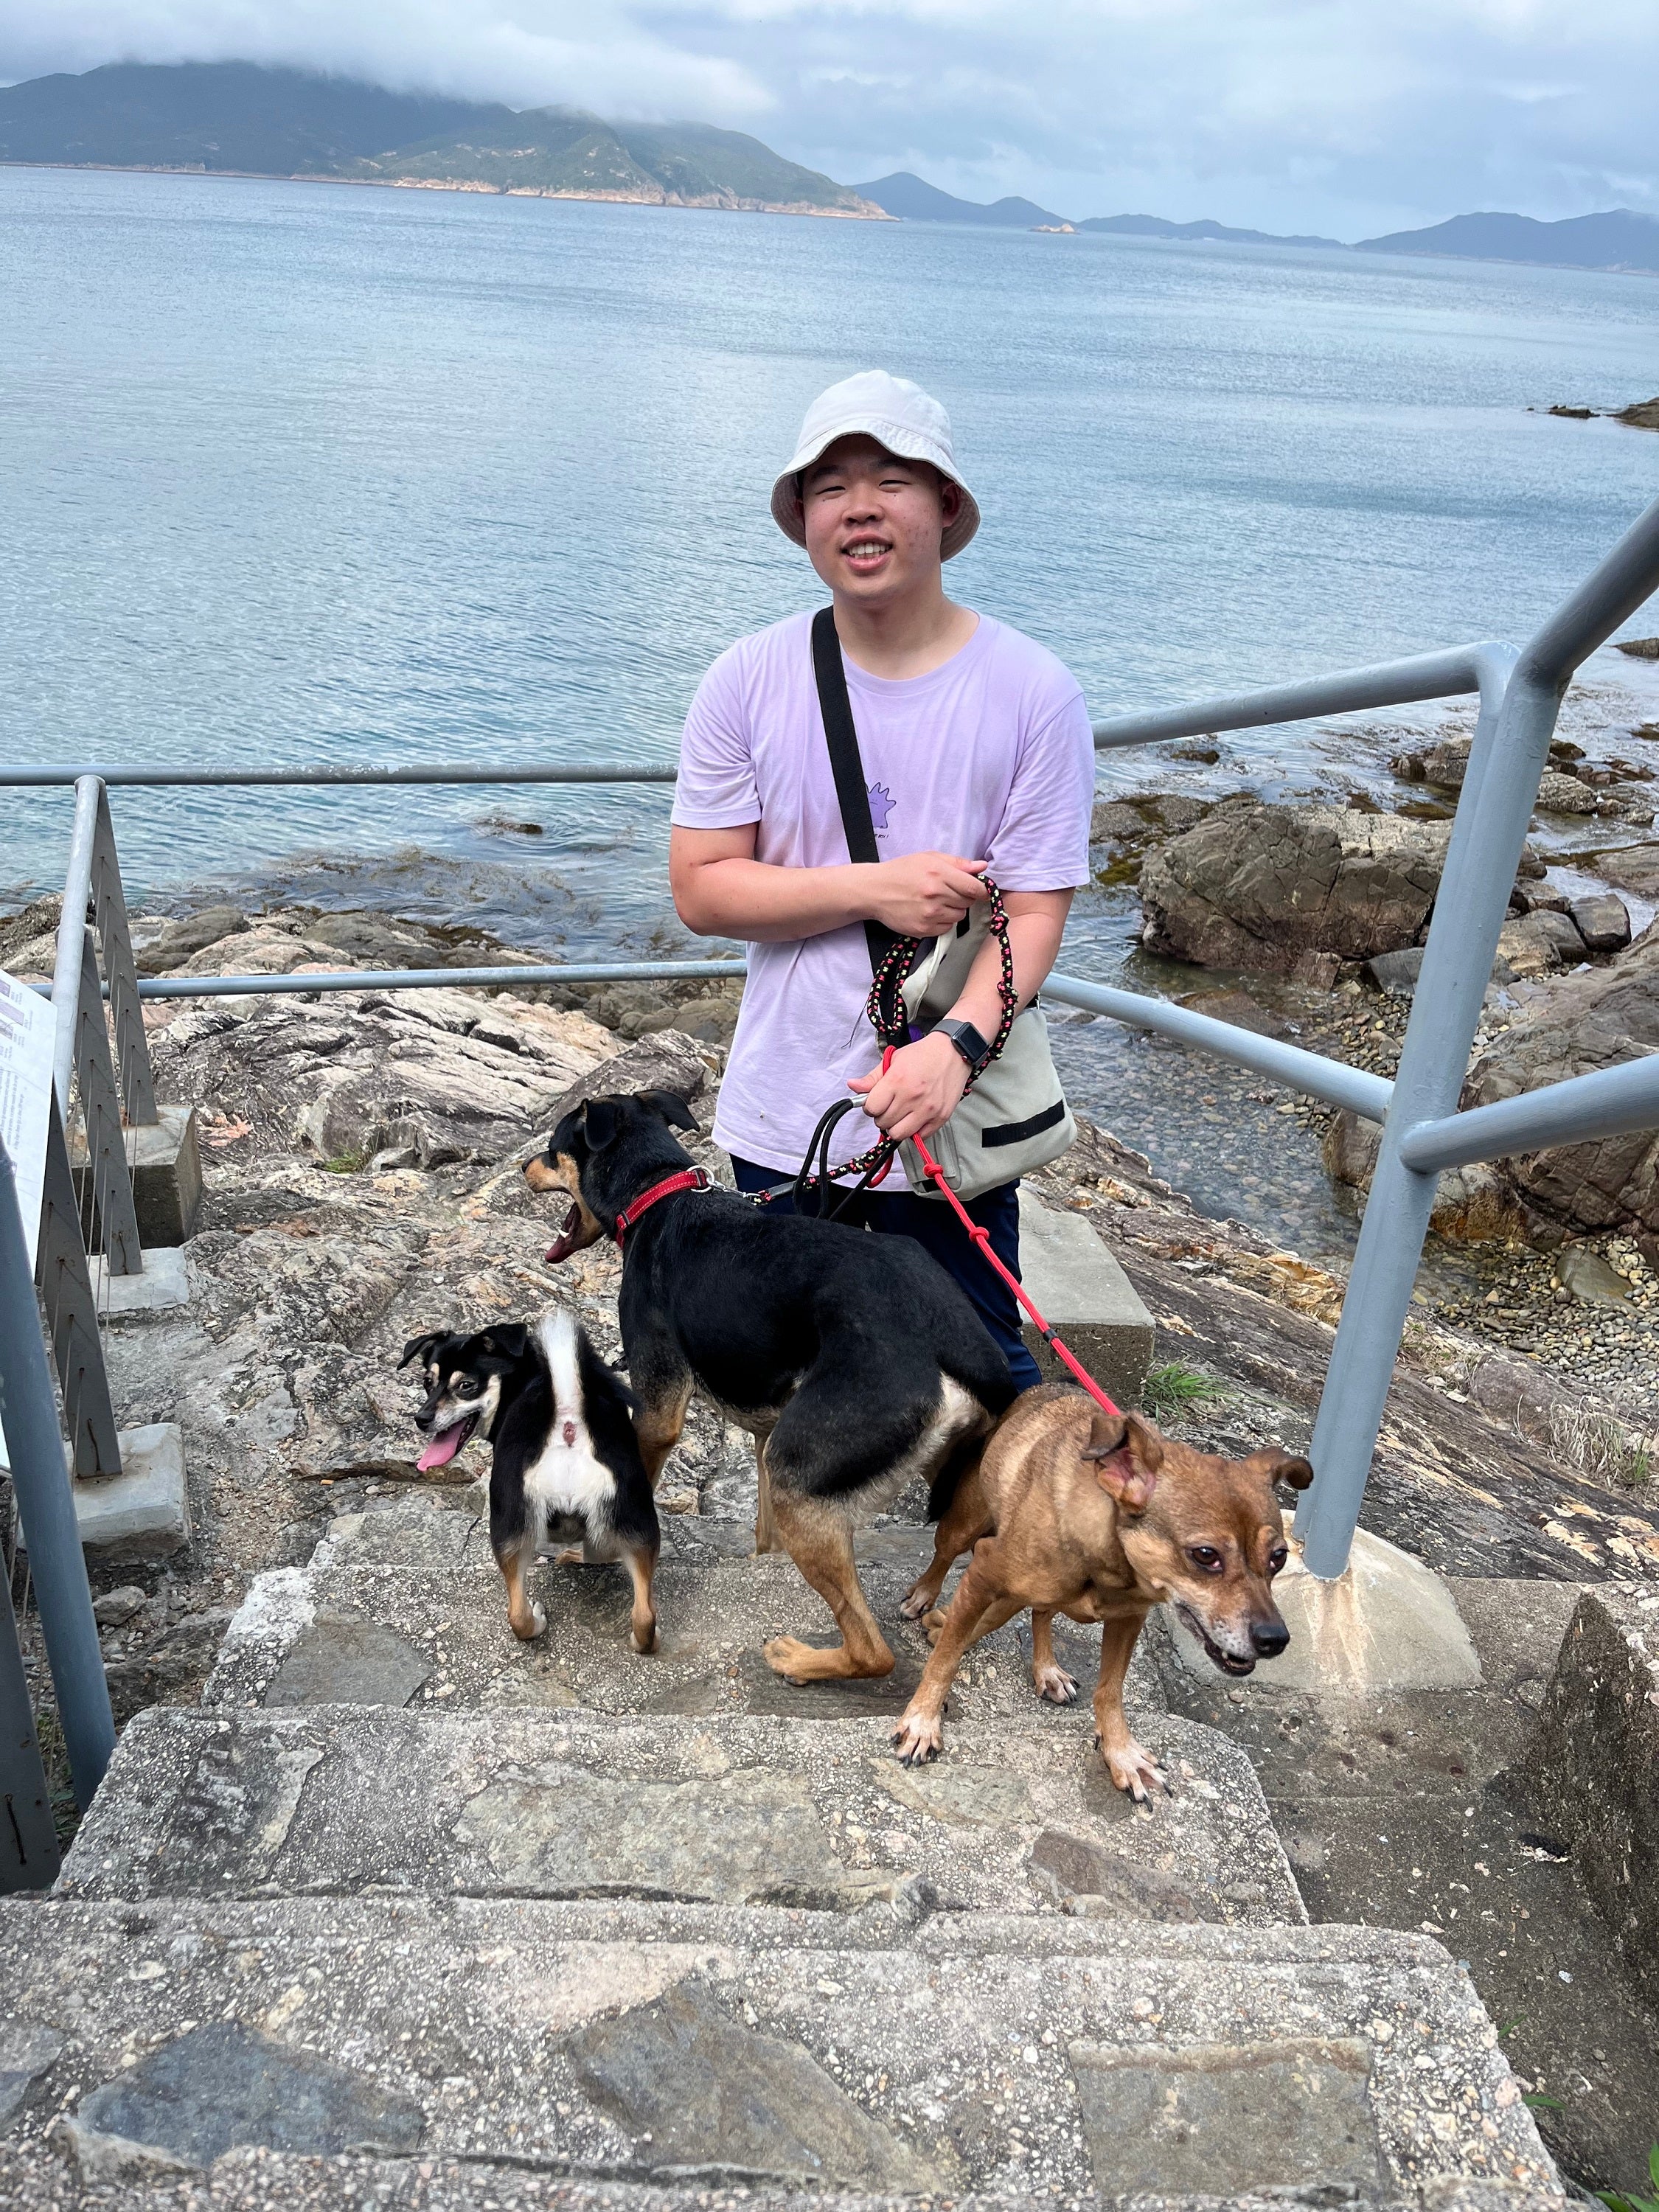 Full body shot of Donald with three dogs in front of a body of water